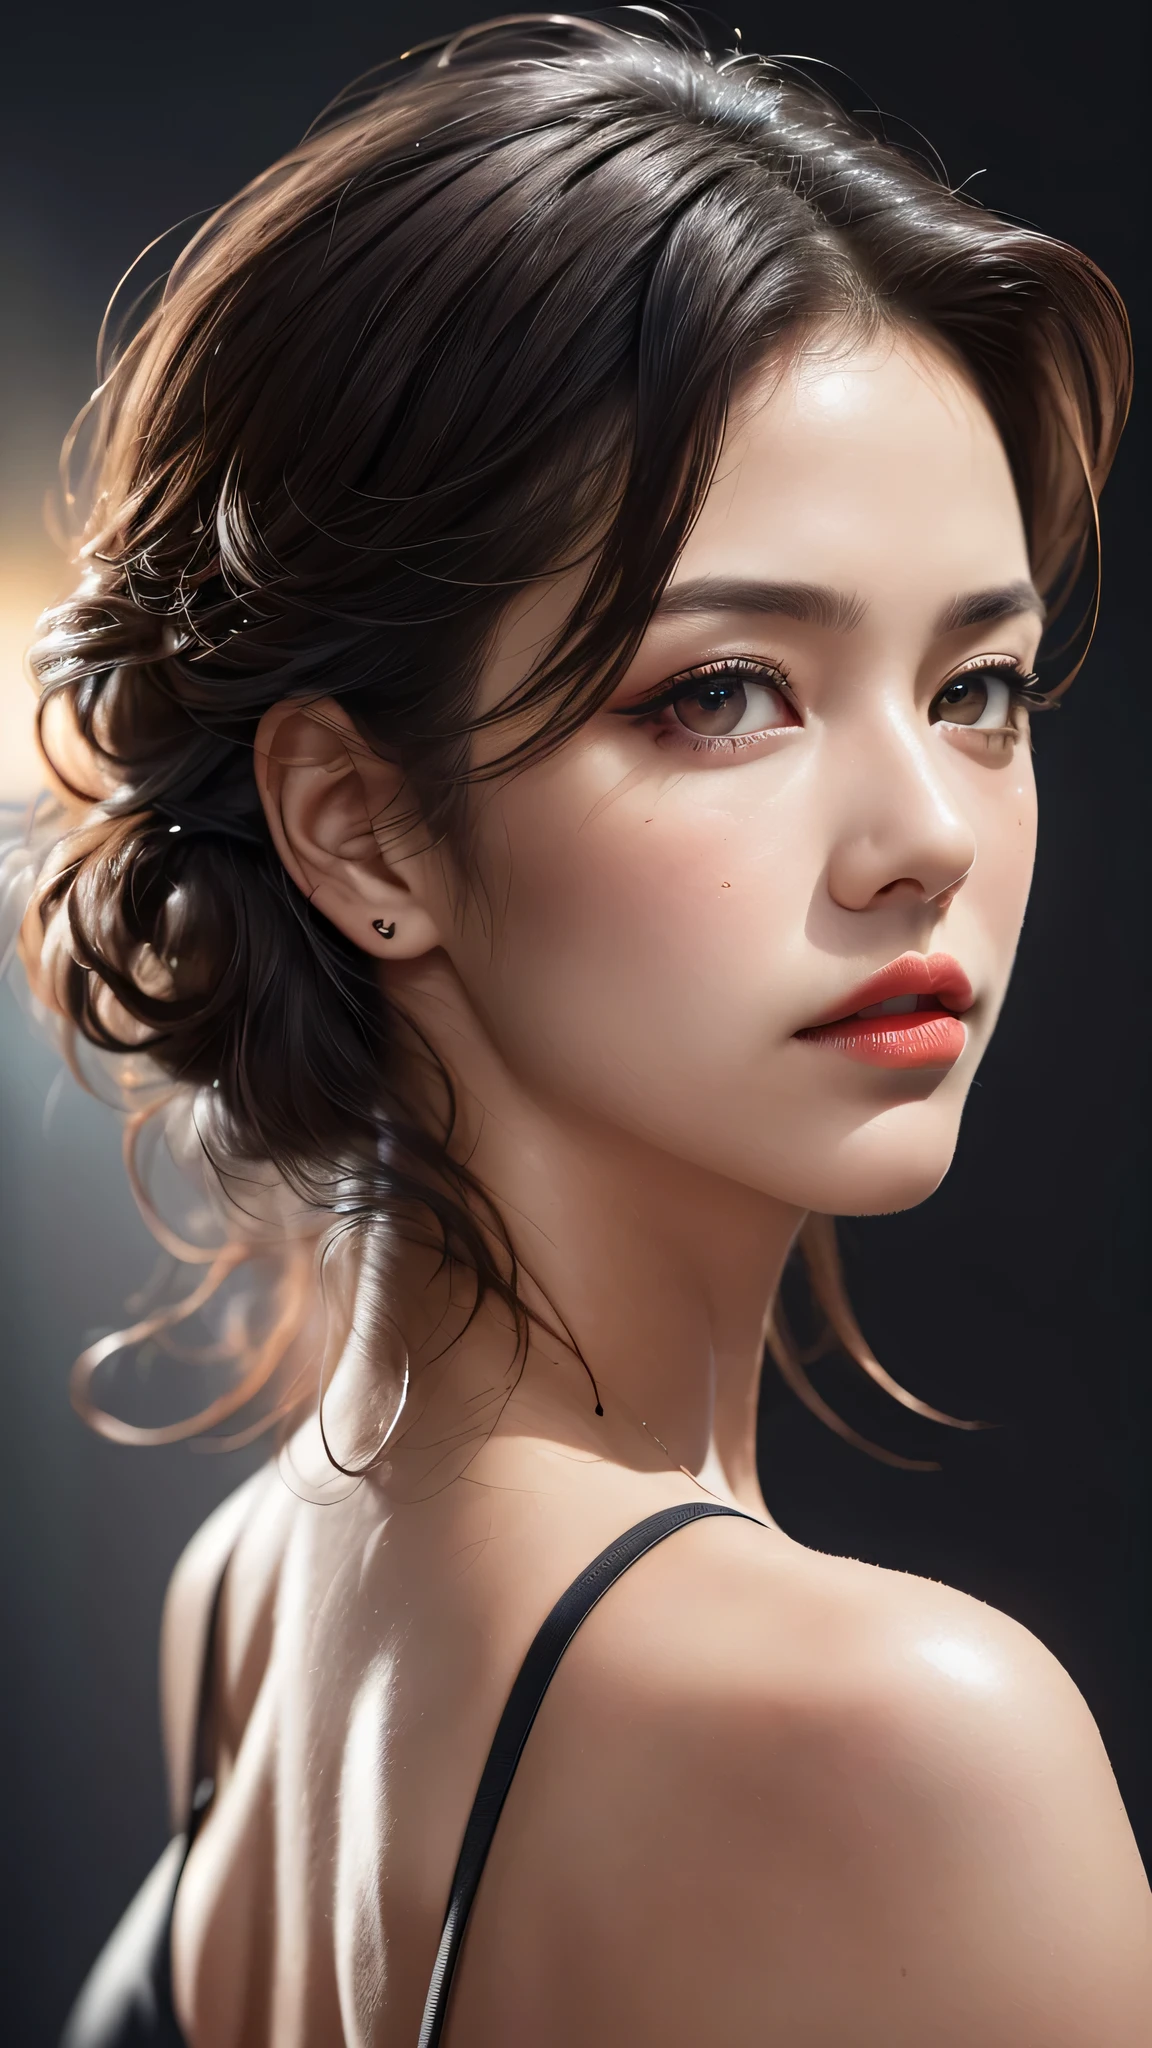 dressed, (photo realistic:1.4), (hyper realistic:1.4), (realistic:1.3), (smoother lighting:1.05), (increase cinematic lighting quality:0.9), 32K, 1girl,25yo girl, realistic lighting, backlighting, light on face, ray trace, (brightening light:1.2), (Increase quality:1.4), (best quality real texture skin:1.4), finely detailed eyes, finely detailed face, finely quality eyes, (tired and sleepy and satisfied:0.0), ((face closeup)), bikini, korean girl, (Increase body line mood:1.1), (Increase skin texture beauty:1.1), (light makeup, [[pink lipstick]], eyeliner), ((dark-Brown eyes)), (((dark medium (((hair slicked to the two side))), extremely detailed))), with a perfect body, super fine face and eyes,